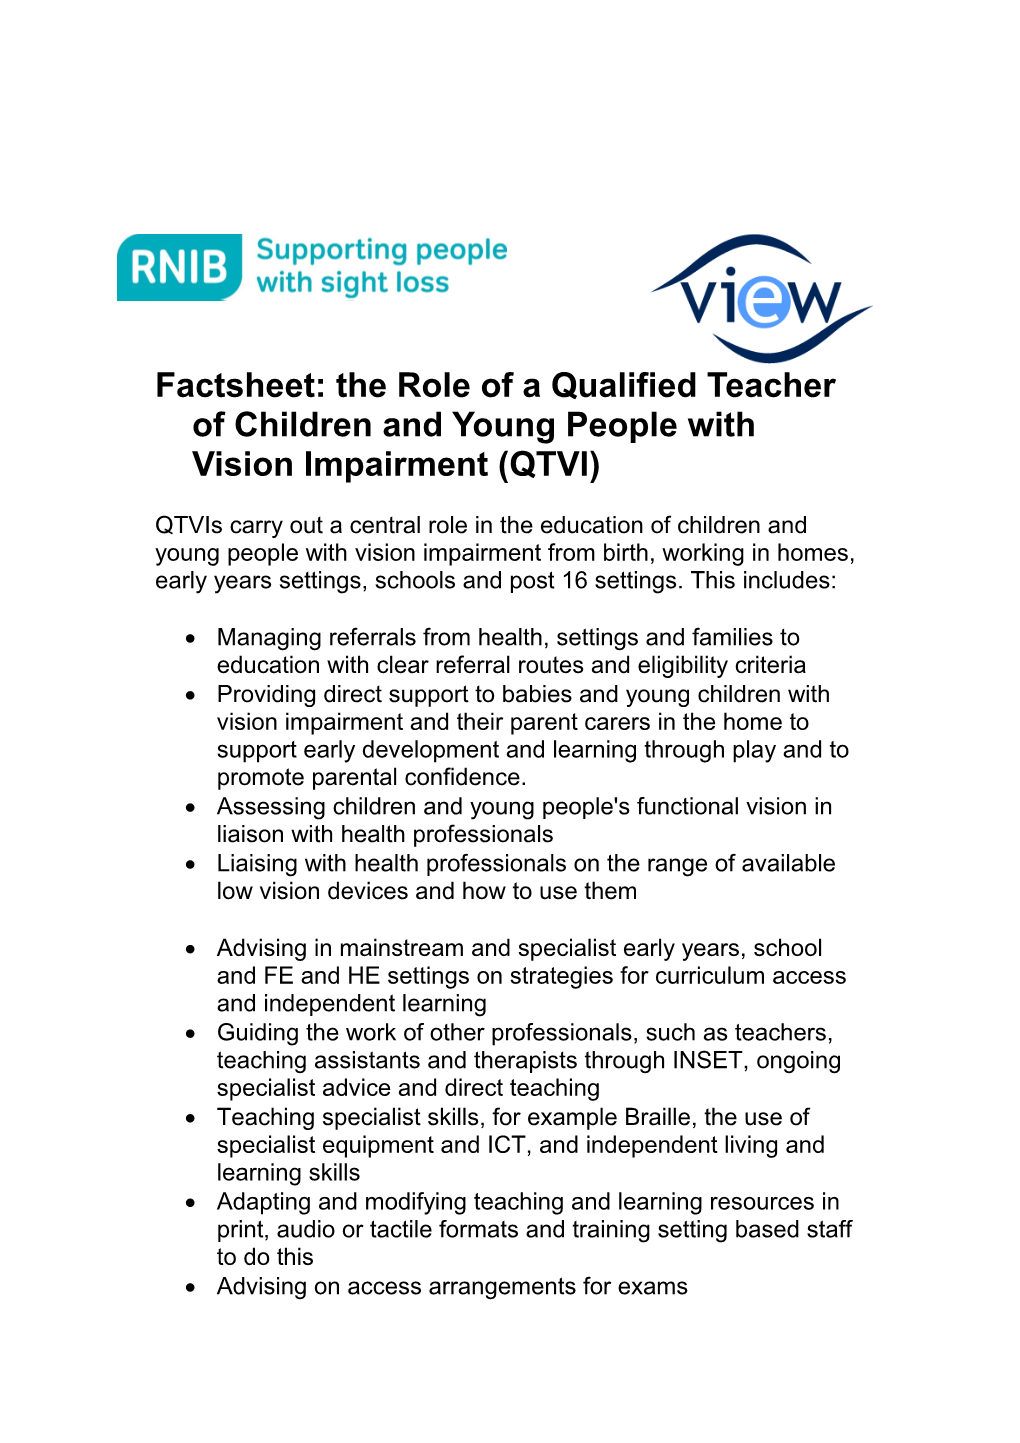 Factsheet: the Role of a Qualified Teacher of Learners with Vision Impairment (QTVI)